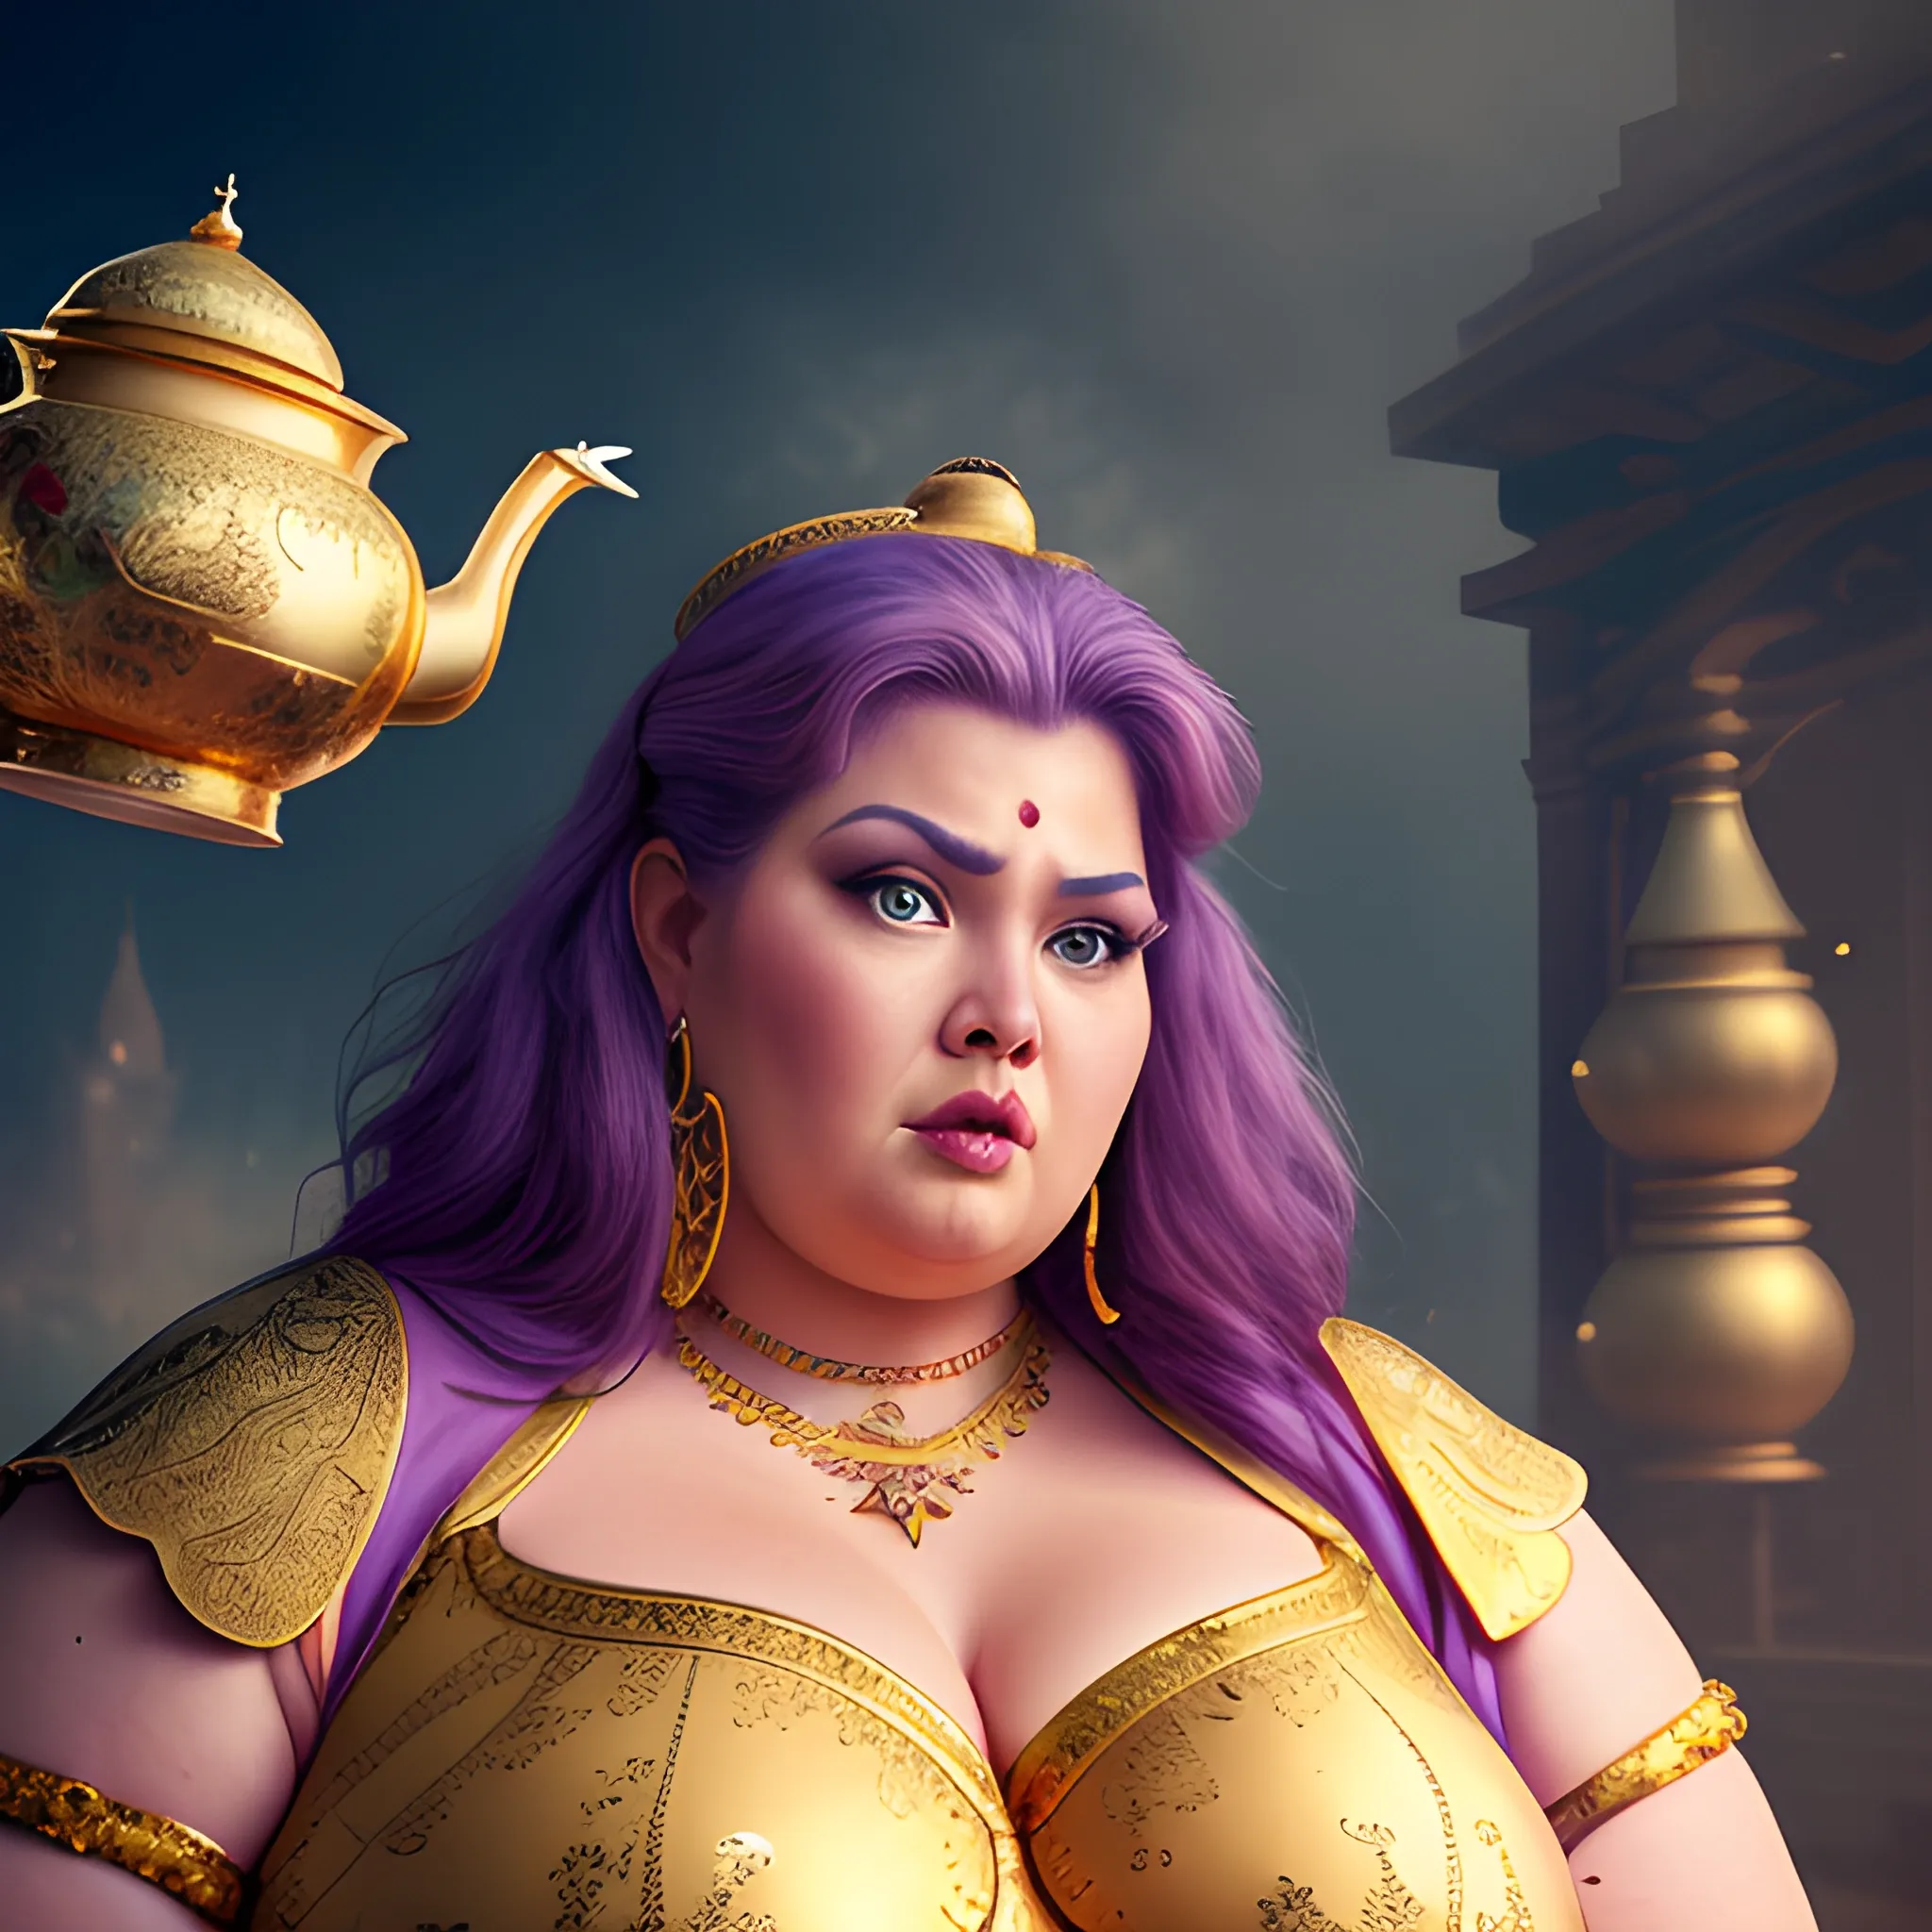  Realistic, high-quality, 8k, extremely detailed photography, high detail photography, big beautiful, adult woman, plus size, gigantic, towering height, female genie being summoned from her magic golden teapot, she hasn't seen a person in centuries, genie cuffs and jewelry,